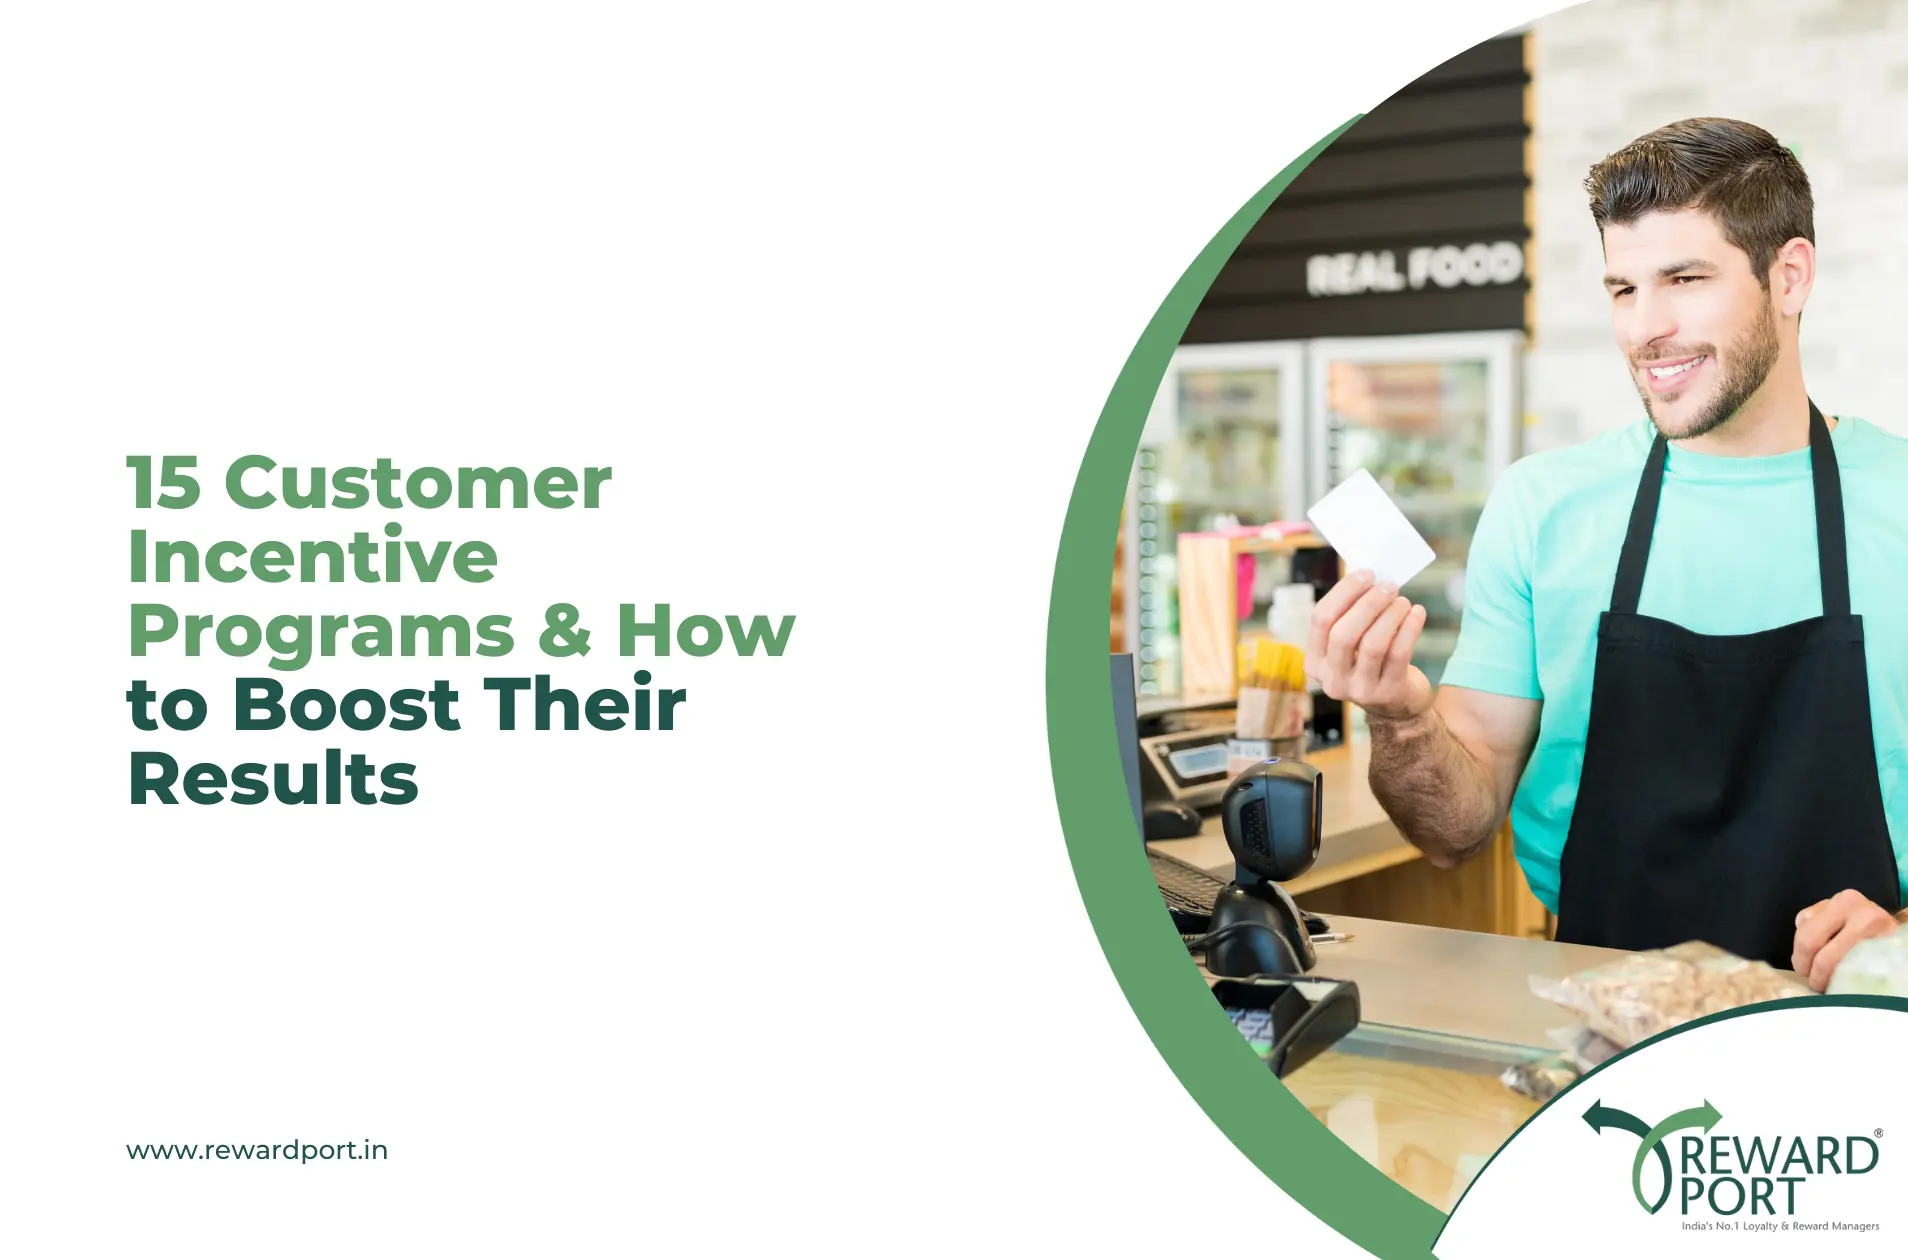 15 Customer Incentive Programs & How to Boost Their Results